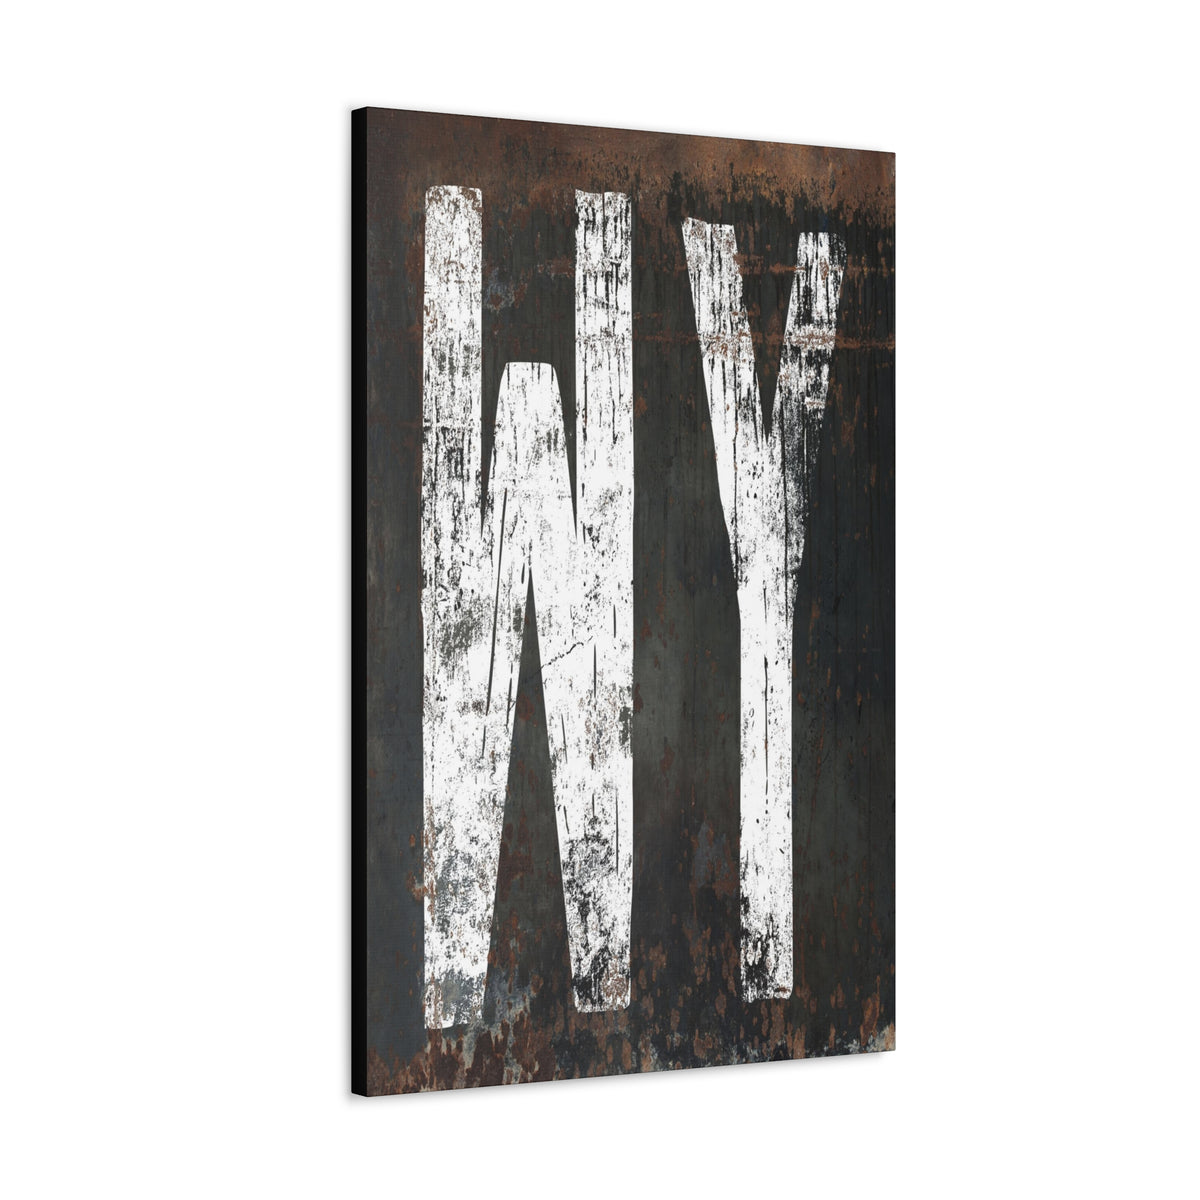 Cowboy Chic Meets Cozy: Wyoming Home State Canvas Rustic Western Farmhouse Canvas Wall Art